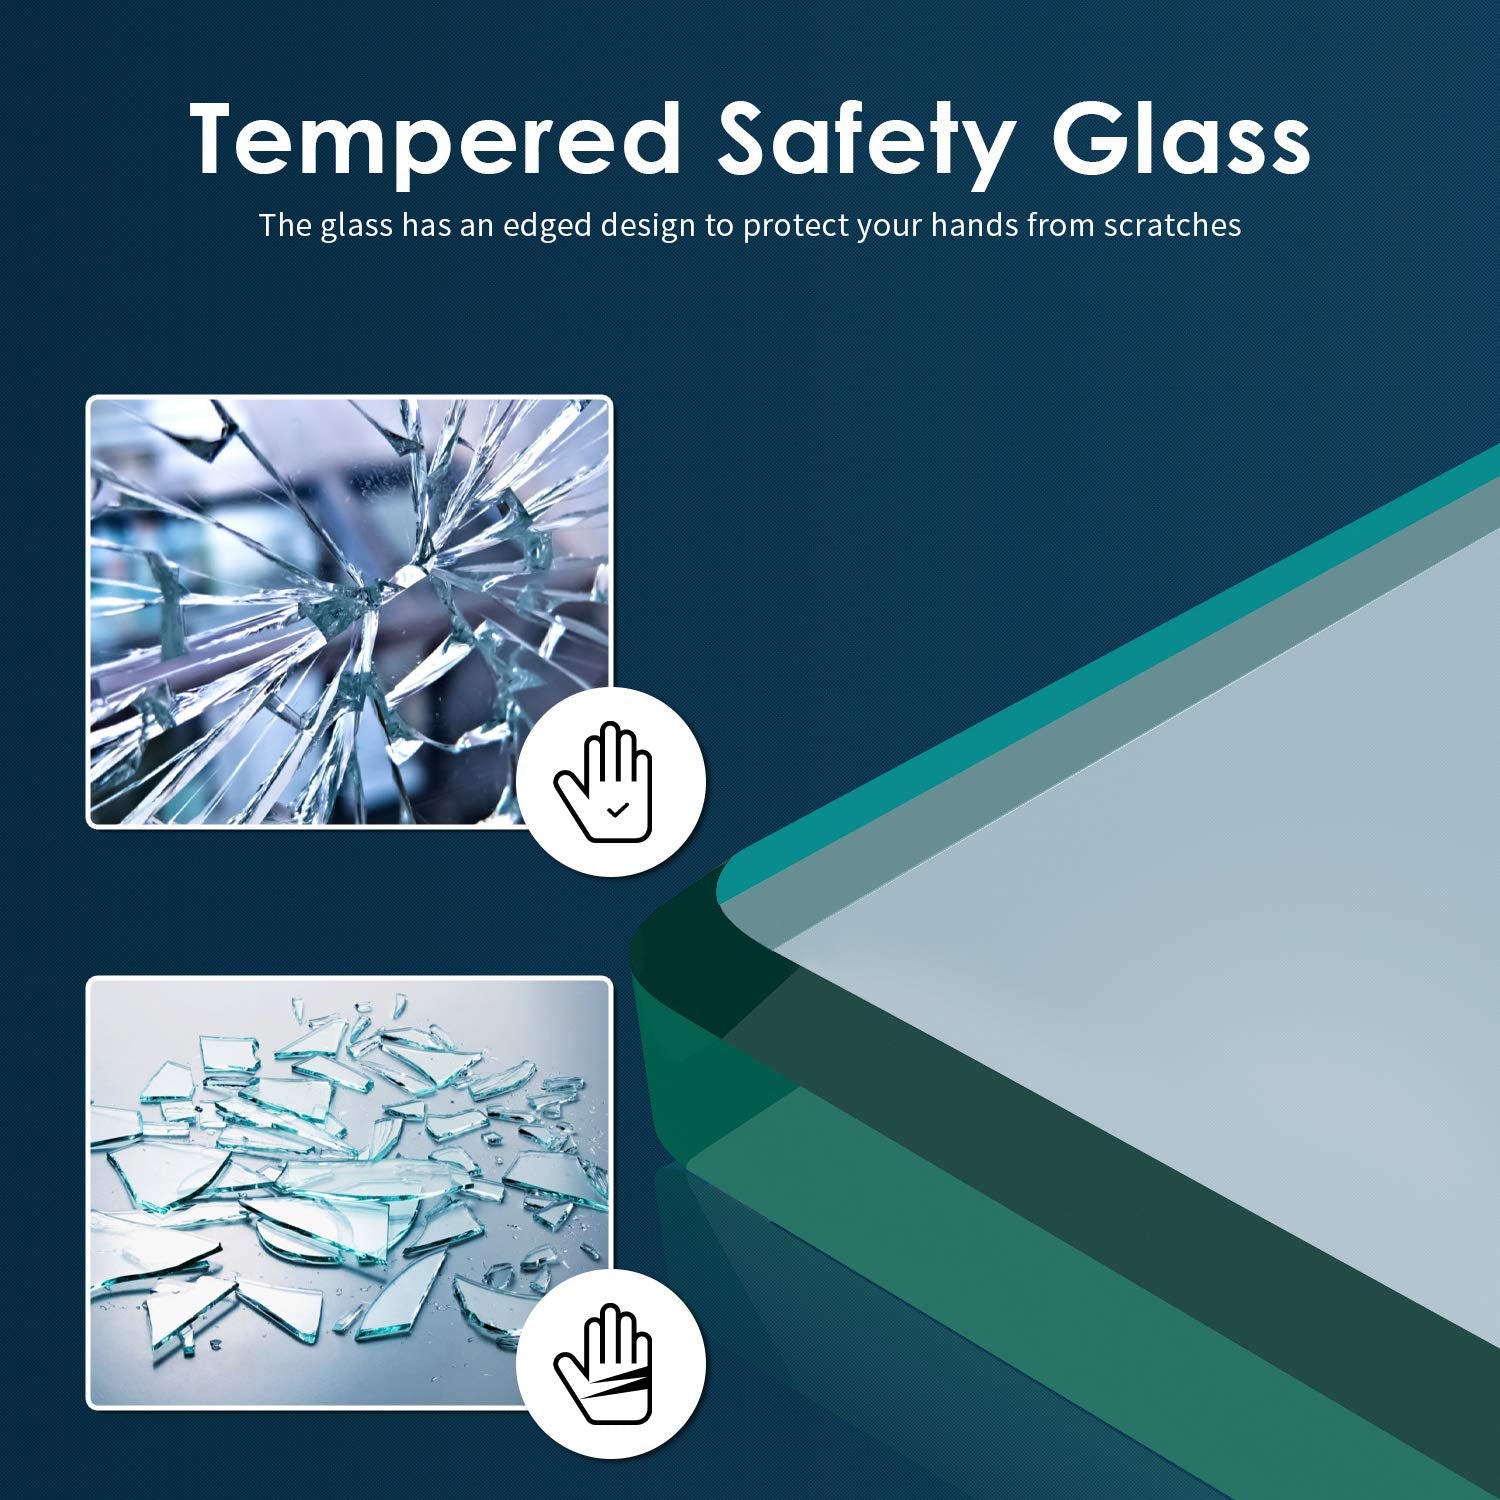 5/16 in. (8 mm) clear tempered glass -safety ANSI Z97.1 certified. No shatter, prevent dirty and easy to clean.